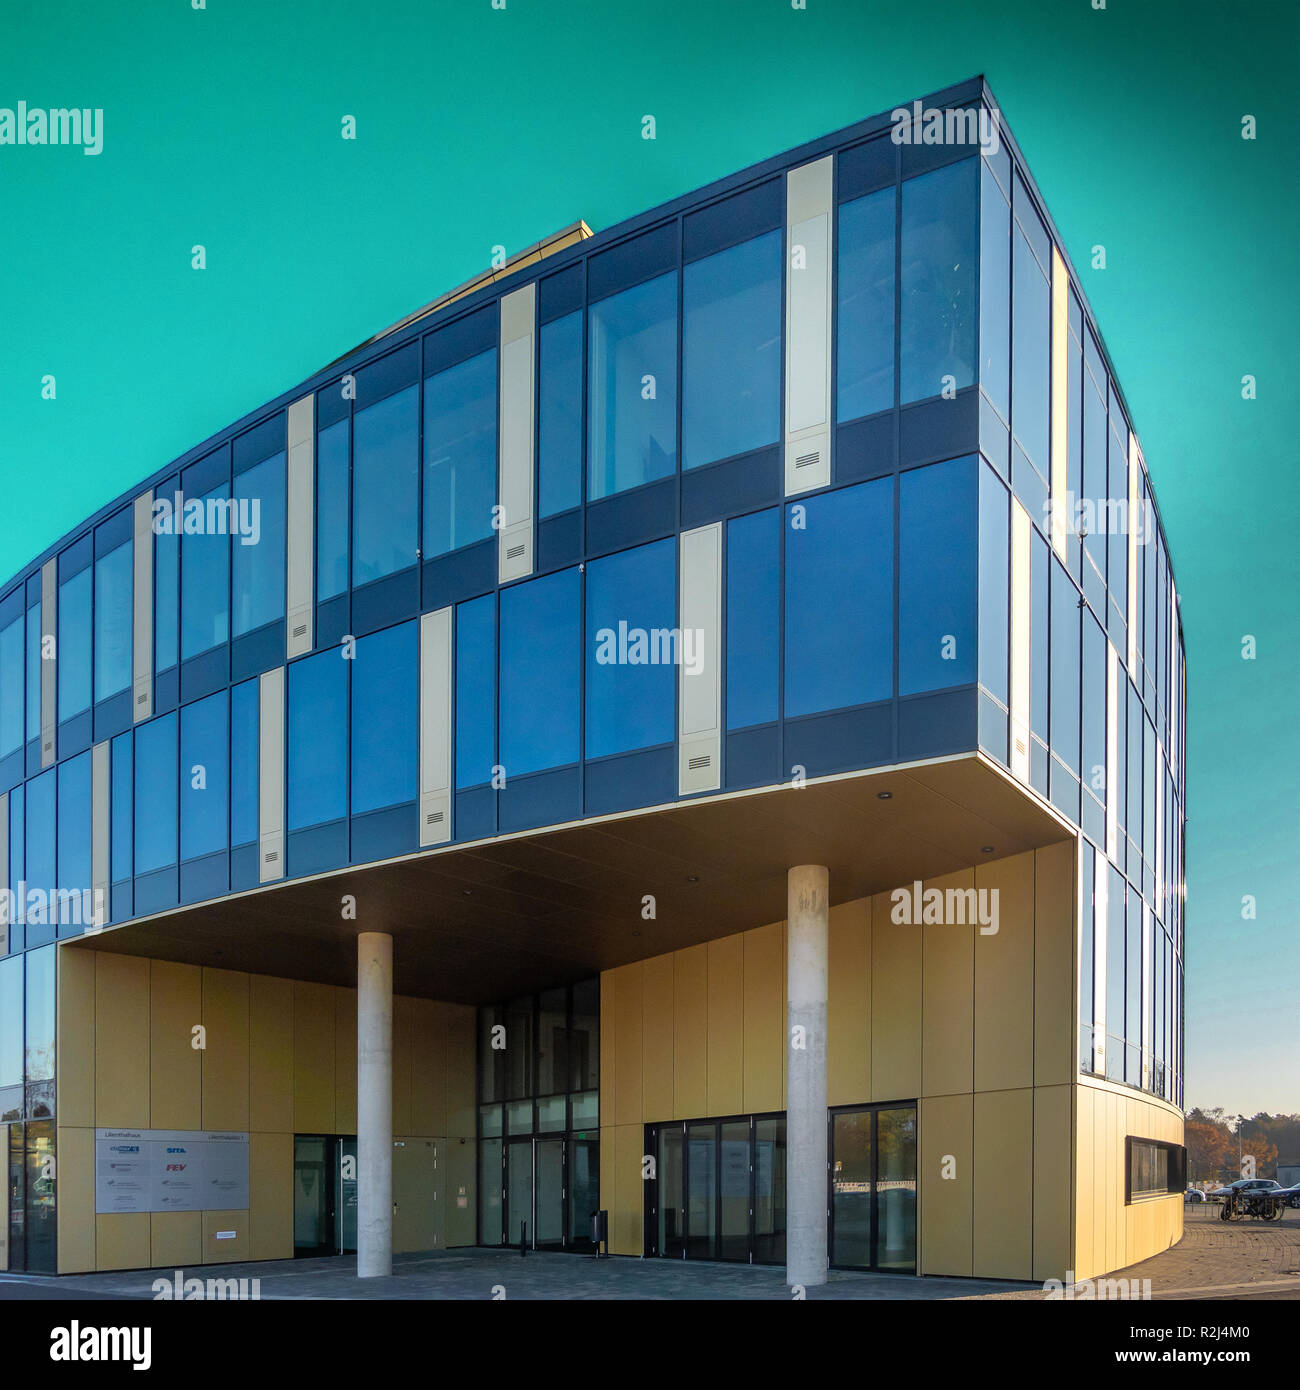 Braunschweig, Germany, November 17, 2018: The Lilienthal building at Braunschweig-Wolfsburg Airport, a new building with large modern glass fronts and Stock Photo